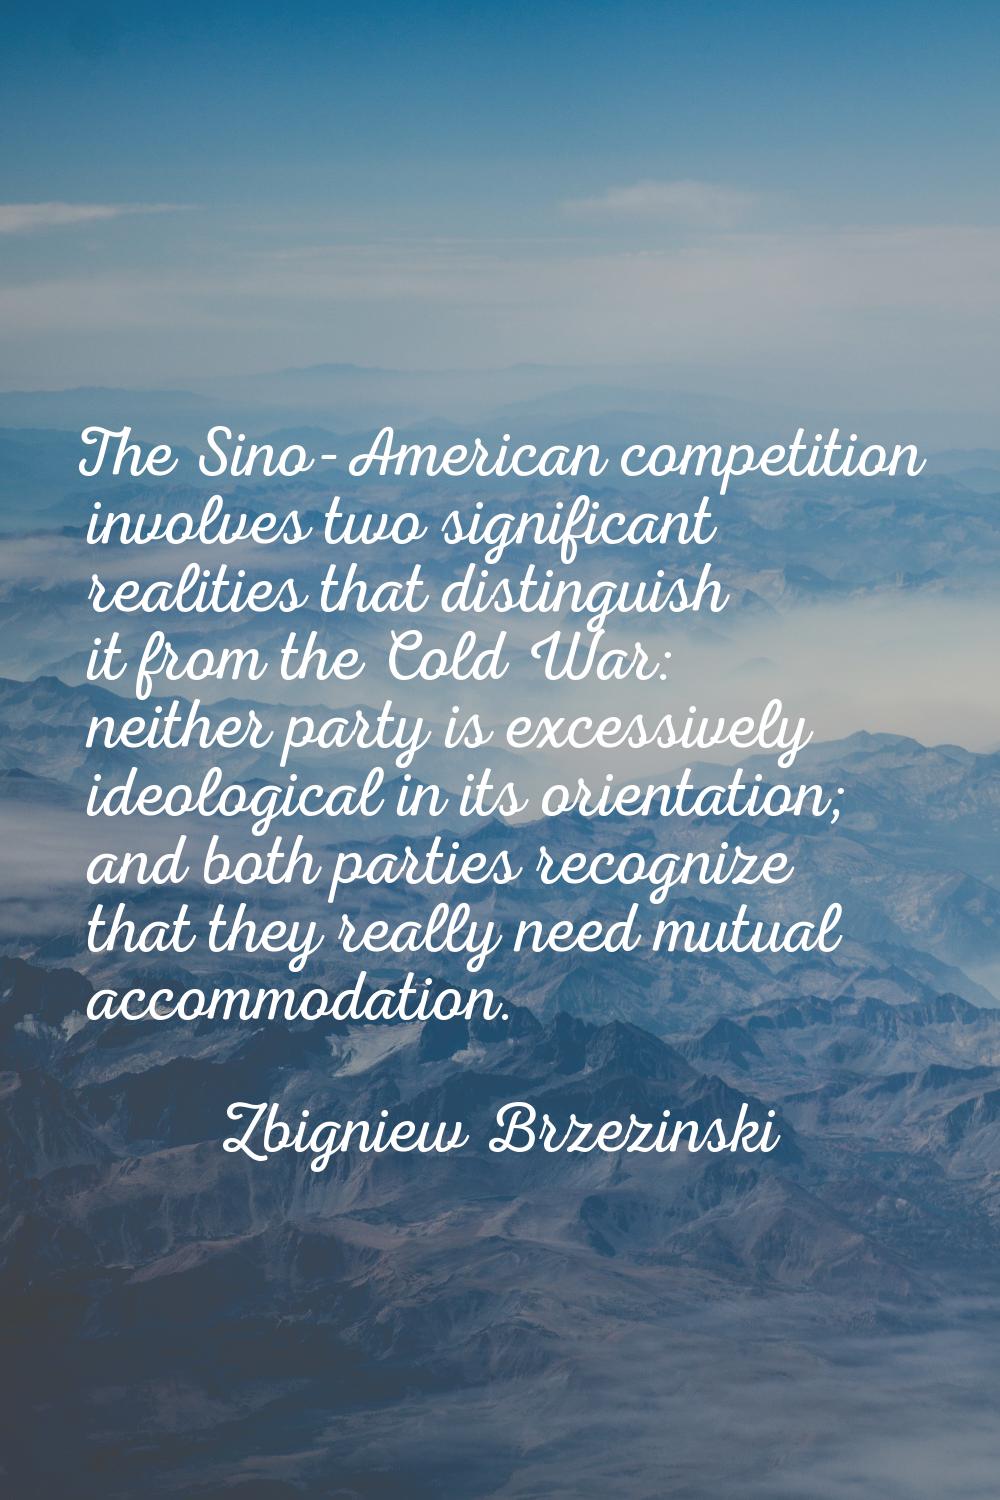 The Sino-American competition involves two significant realities that distinguish it from the Cold 